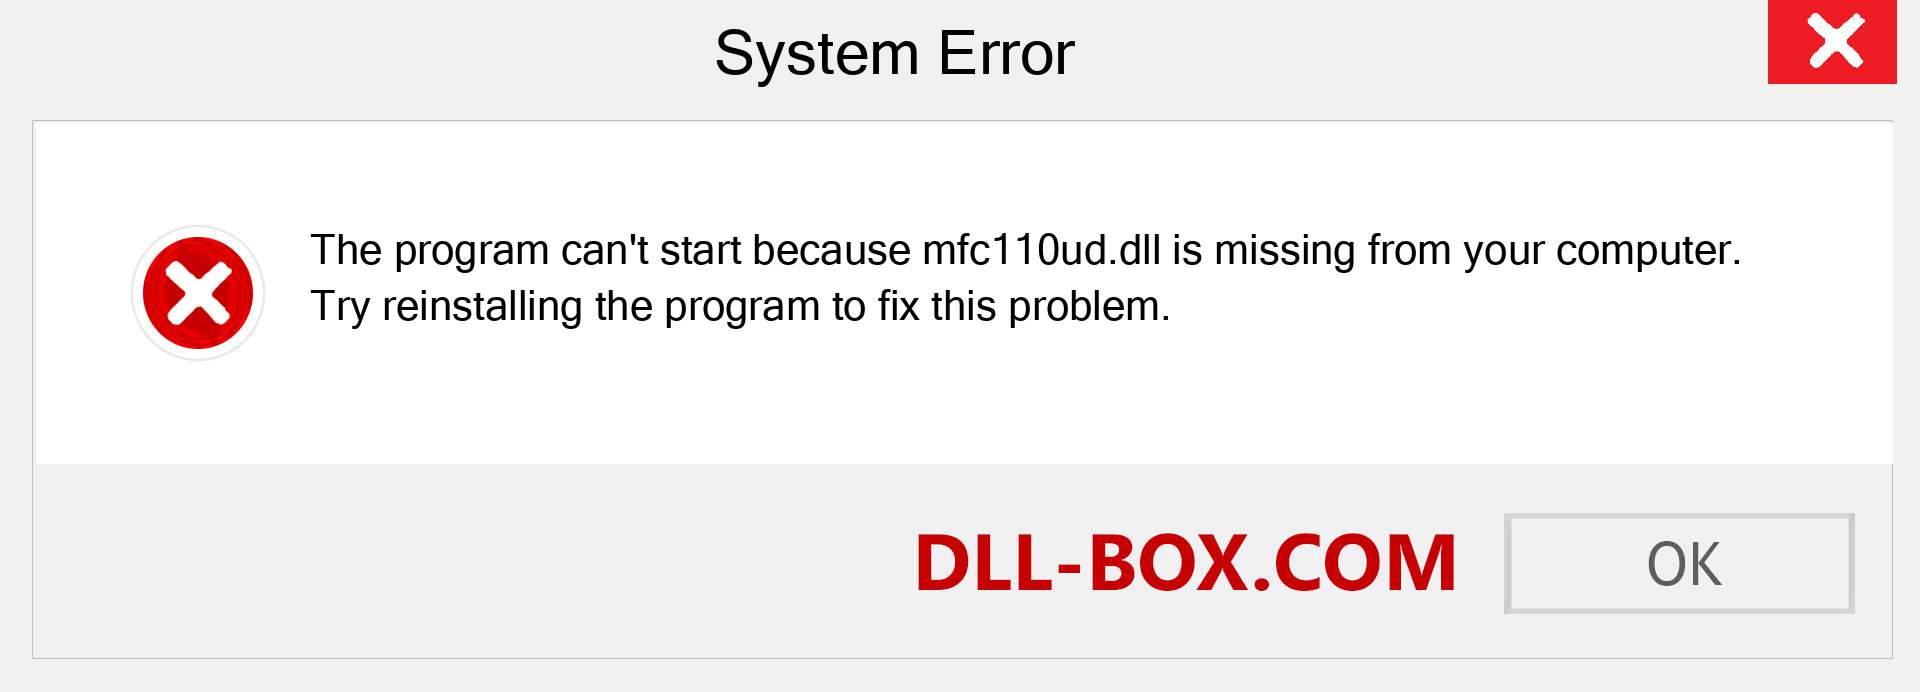  mfc110ud.dll file is missing?. Download for Windows 7, 8, 10 - Fix  mfc110ud dll Missing Error on Windows, photos, images